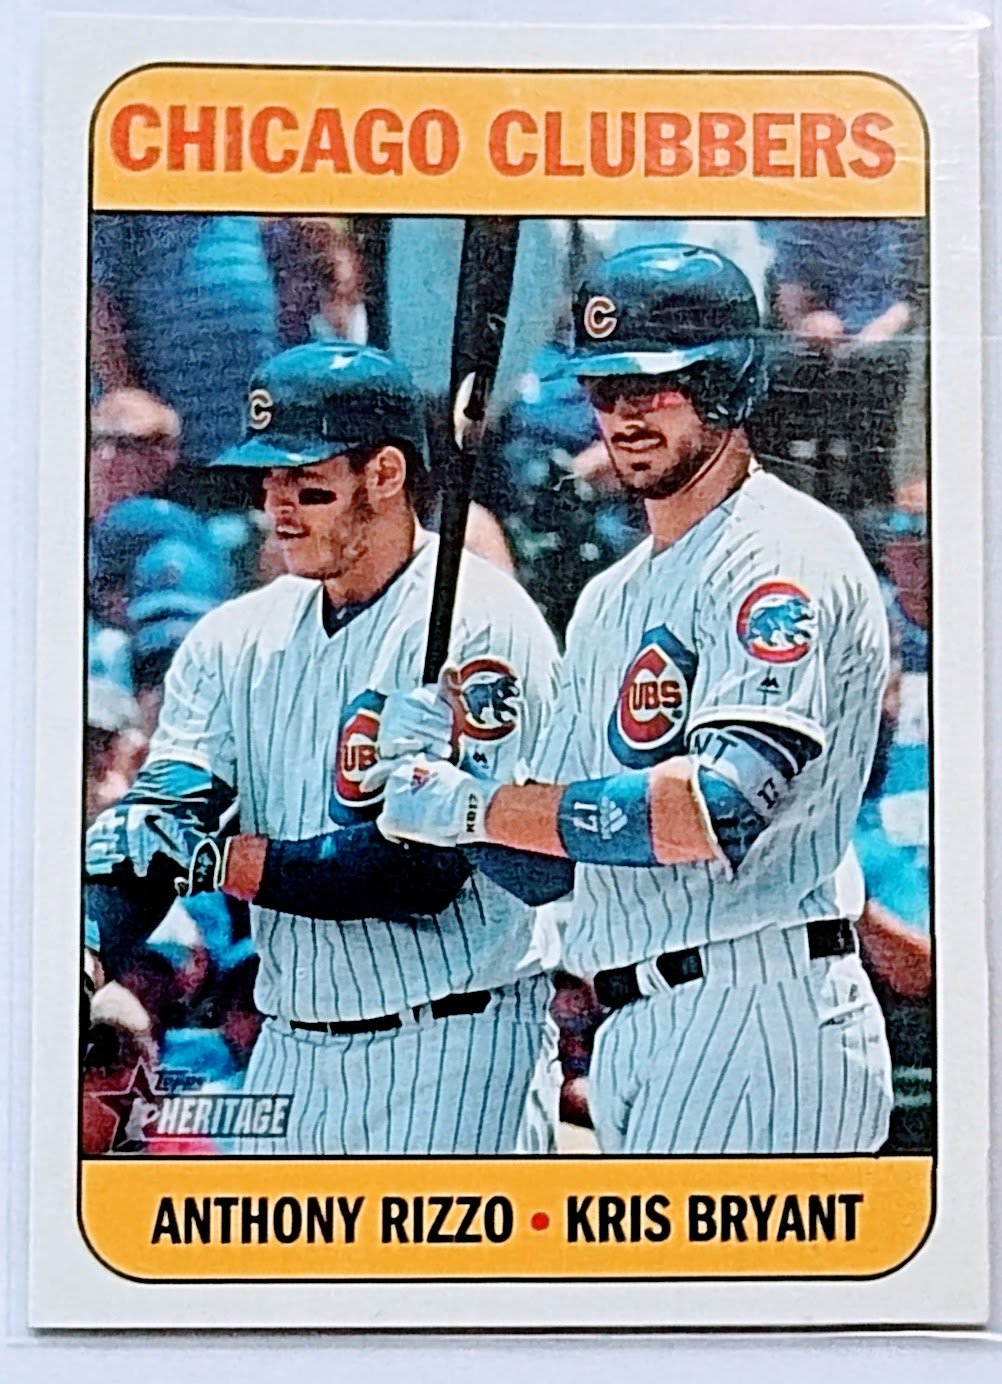 2018 Topps Heritage Anthony Rizzo & Kris Bryant Chicago Clubbers Insert Baseball Card TPTV simple Xclusive Collectibles   